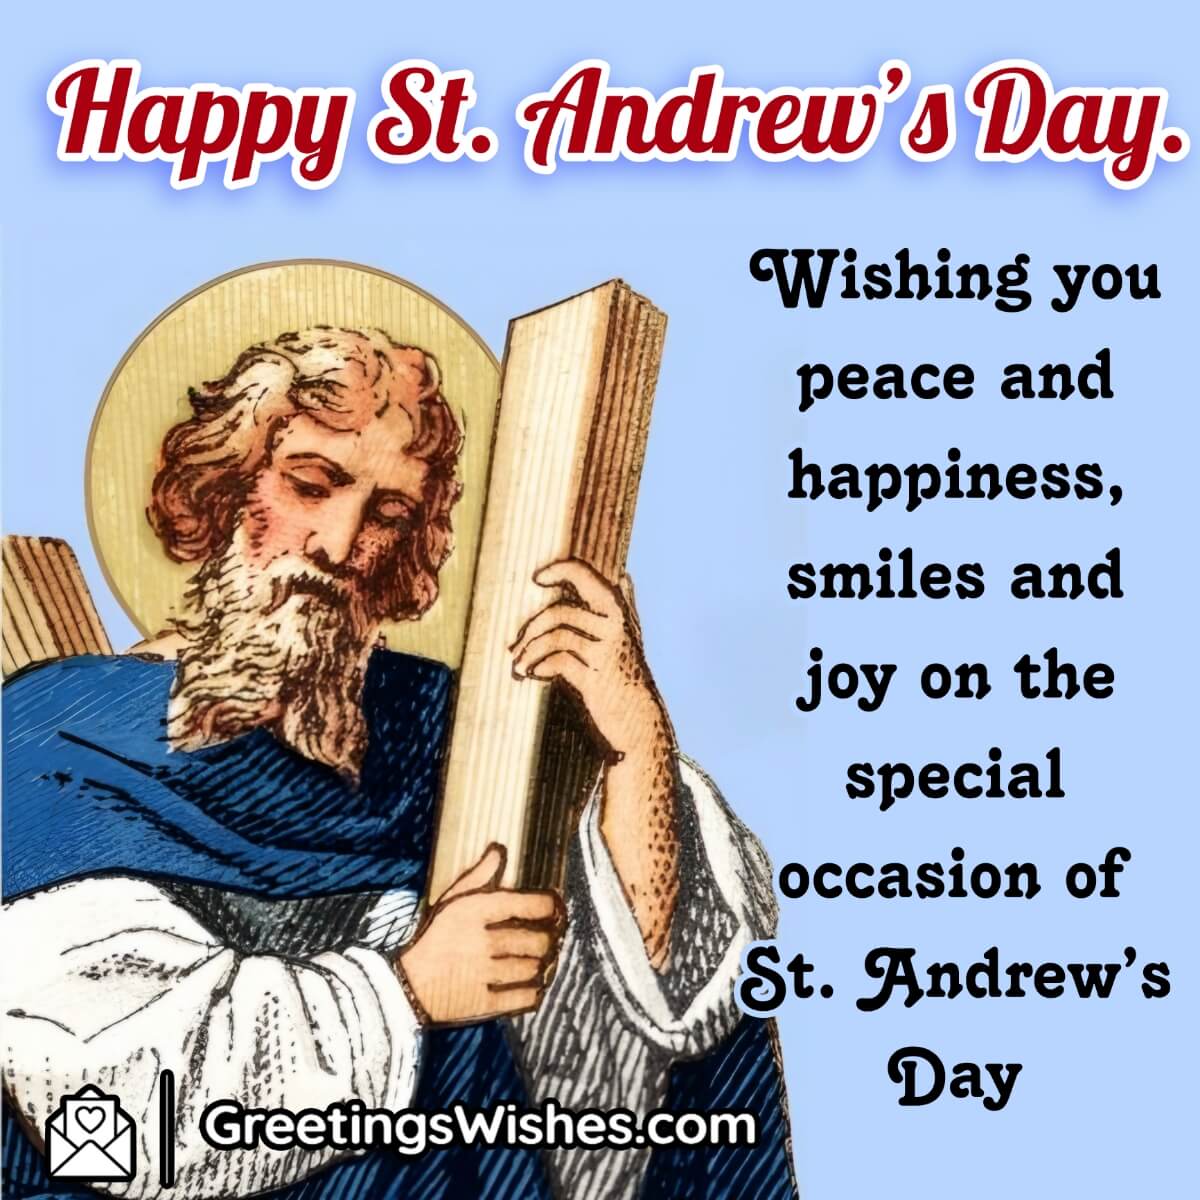 Happy St. Andrew’s Day Wishes